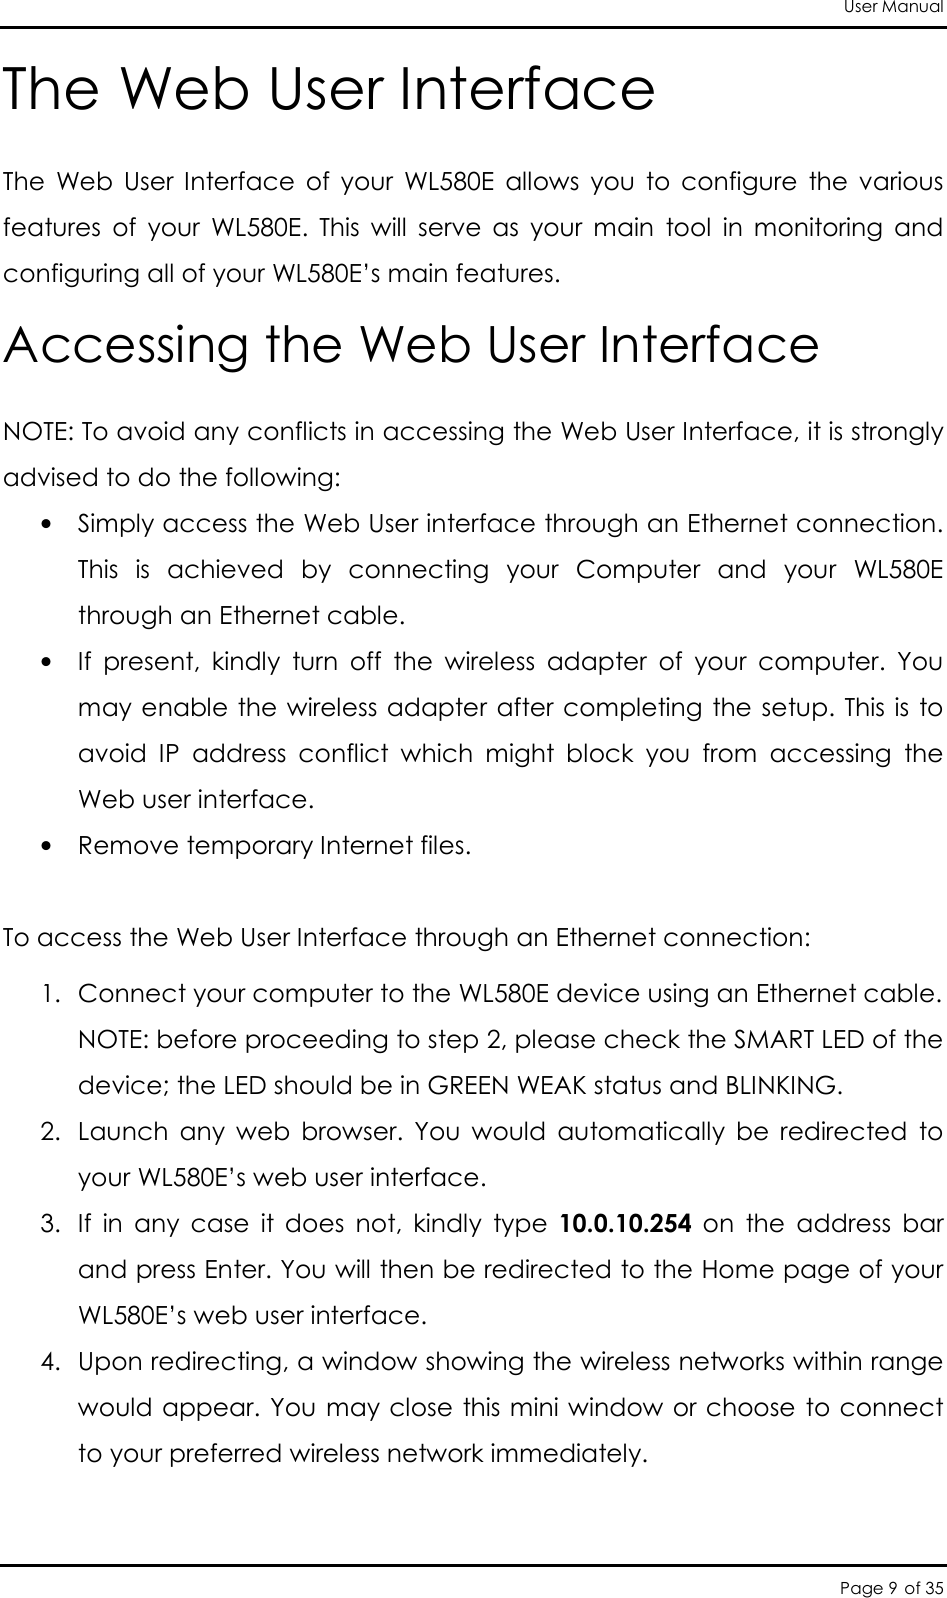 User Manual Page 9 of 35 The Web User Interface The  Web  User  Interface  of  your  WL580E  allows  you  to  configure  the  various features  of  your  WL580E.  This  will  serve  as  your  main  tool  in  monitoring  and configuring all of your WL580E’s main features. Accessing the Web User Interface  NOTE: To avoid any conflicts in accessing the Web User Interface, it is strongly advised to do the following:  • Simply access the Web User interface through an Ethernet connection. This  is  achieved  by  connecting  your  Computer  and  your  WL580E through an Ethernet cable.  • If  present,  kindly  turn  off  the  wireless  adapter  of  your  computer.  You may enable the wireless adapter after completing the setup. This is to avoid  IP  address  conflict  which  might  block  you  from  accessing  the Web user interface.  • Remove temporary Internet files.  To access the Web User Interface through an Ethernet connection:  1. Connect your computer to the WL580E device using an Ethernet cable.  NOTE: before proceeding to step 2, please check the SMART LED of the device; the LED should be in GREEN WEAK status and BLINKING.  2. Launch  any  web  browser.  You  would  automatically  be  redirected  to your WL580E’s web user interface.  3. If  in  any  case  it  does  not,  kindly  type  10.0.10.254  on  the  address  bar and press Enter. You will then be redirected to the Home page of your WL580E’s web user interface.  4. Upon redirecting, a window showing the wireless networks within range would appear. You may close this mini window or choose to connect to your preferred wireless network immediately.   